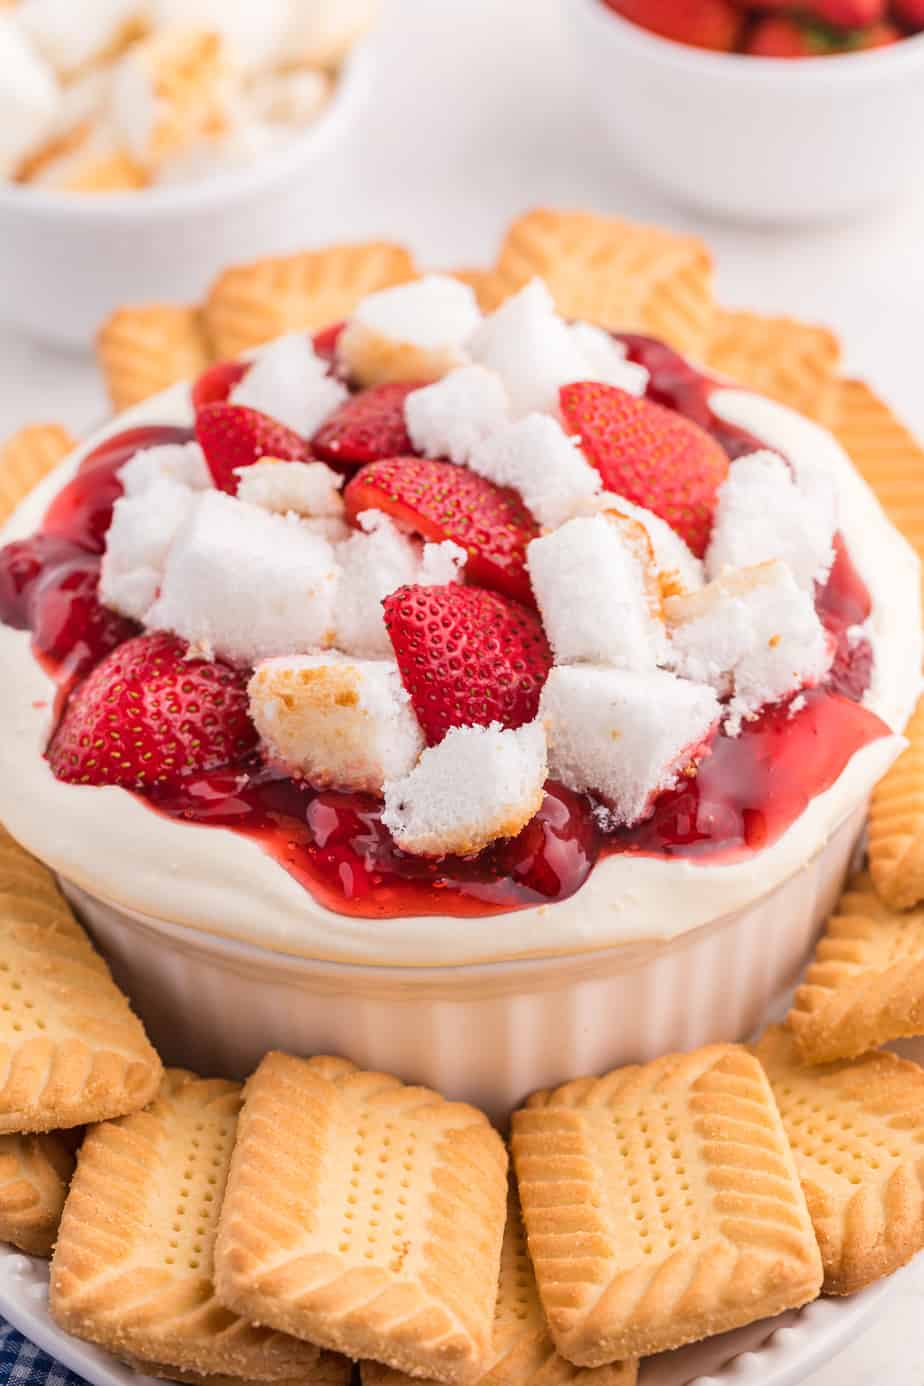 Cheesecake dip topped with strawberries, red strawberry sauce and angel food cake pieces surrounded by cookies on a platter